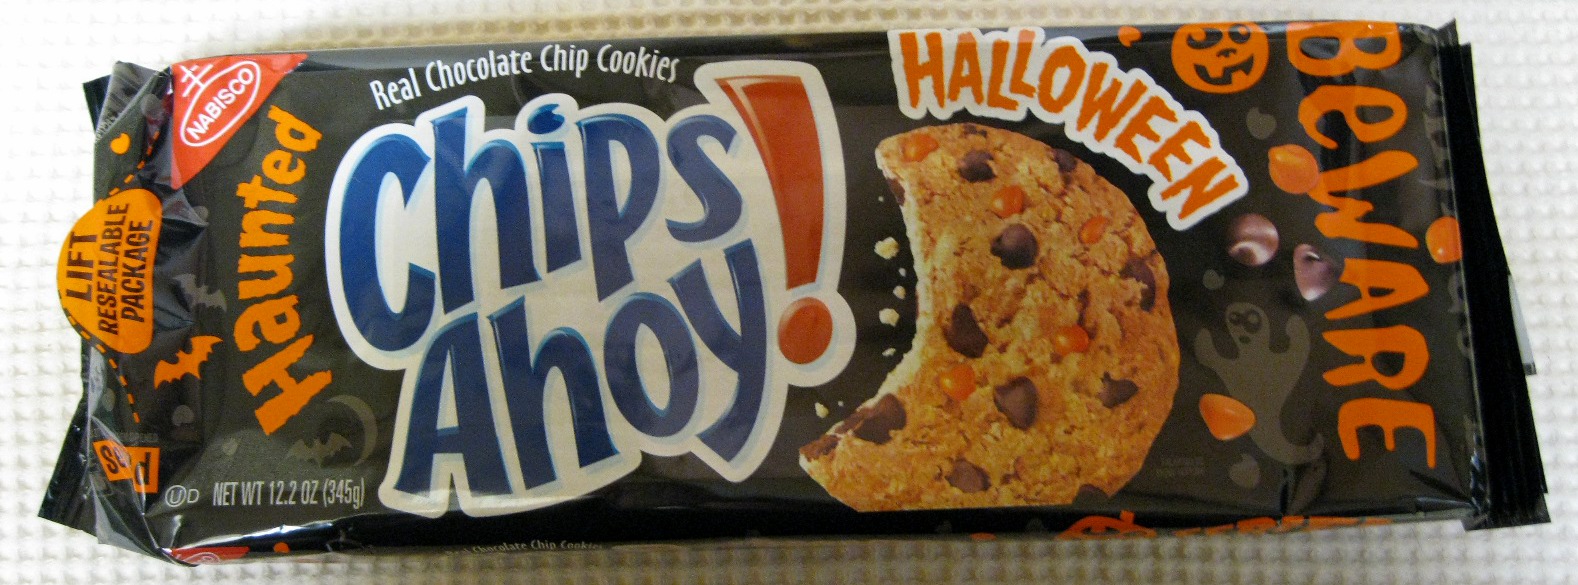 chips ahoy logo black and white